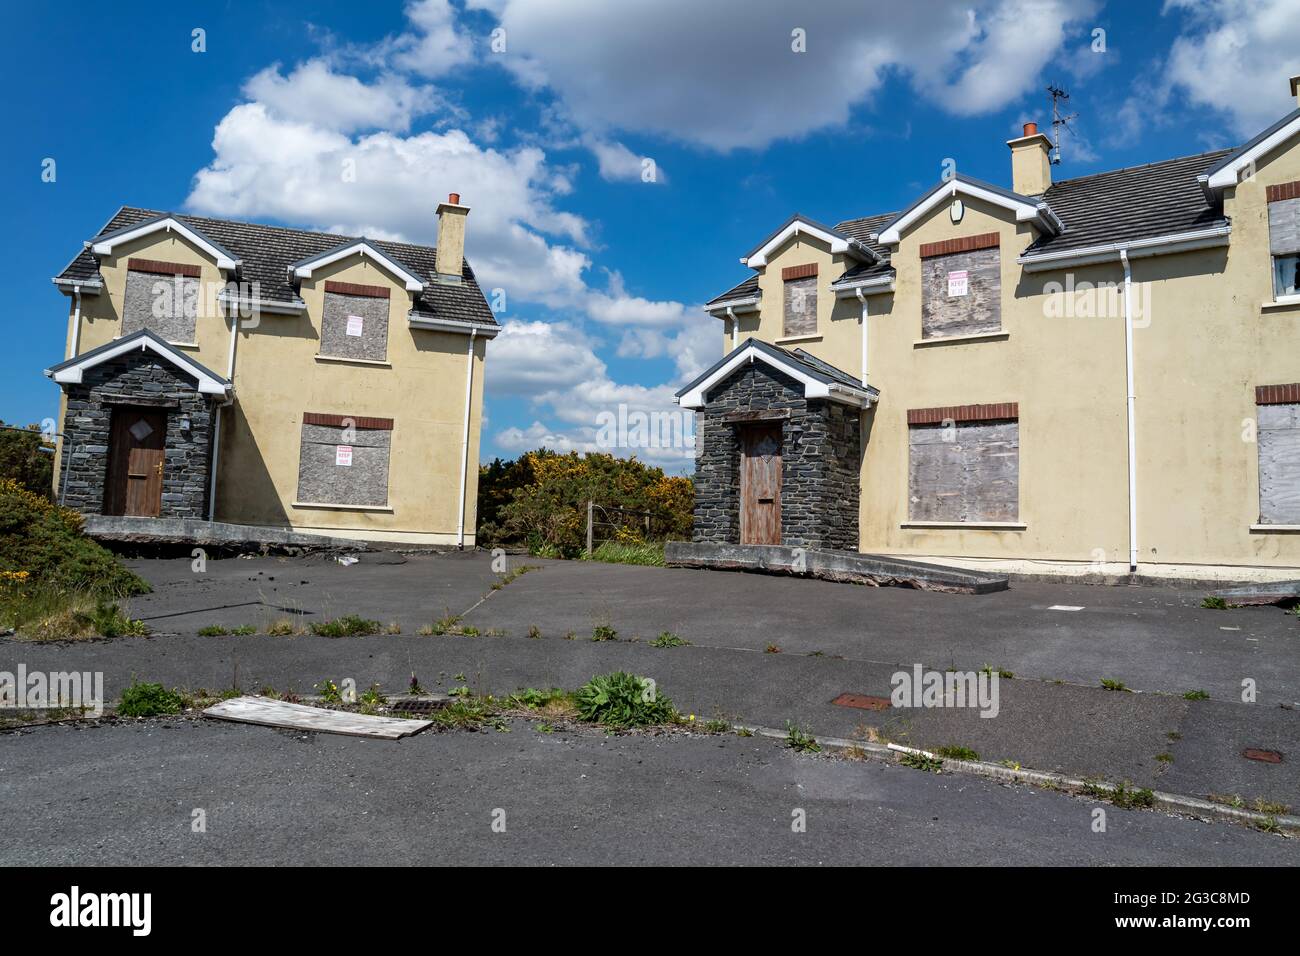 RADHARC AN SEASCAN, MEENMORE, DUNGLOE, COUNTY DONEGAL, IRELAND - MAY 30 2021 : The 2007 built houses sinking into the peatbog are still standing. Stock Photo